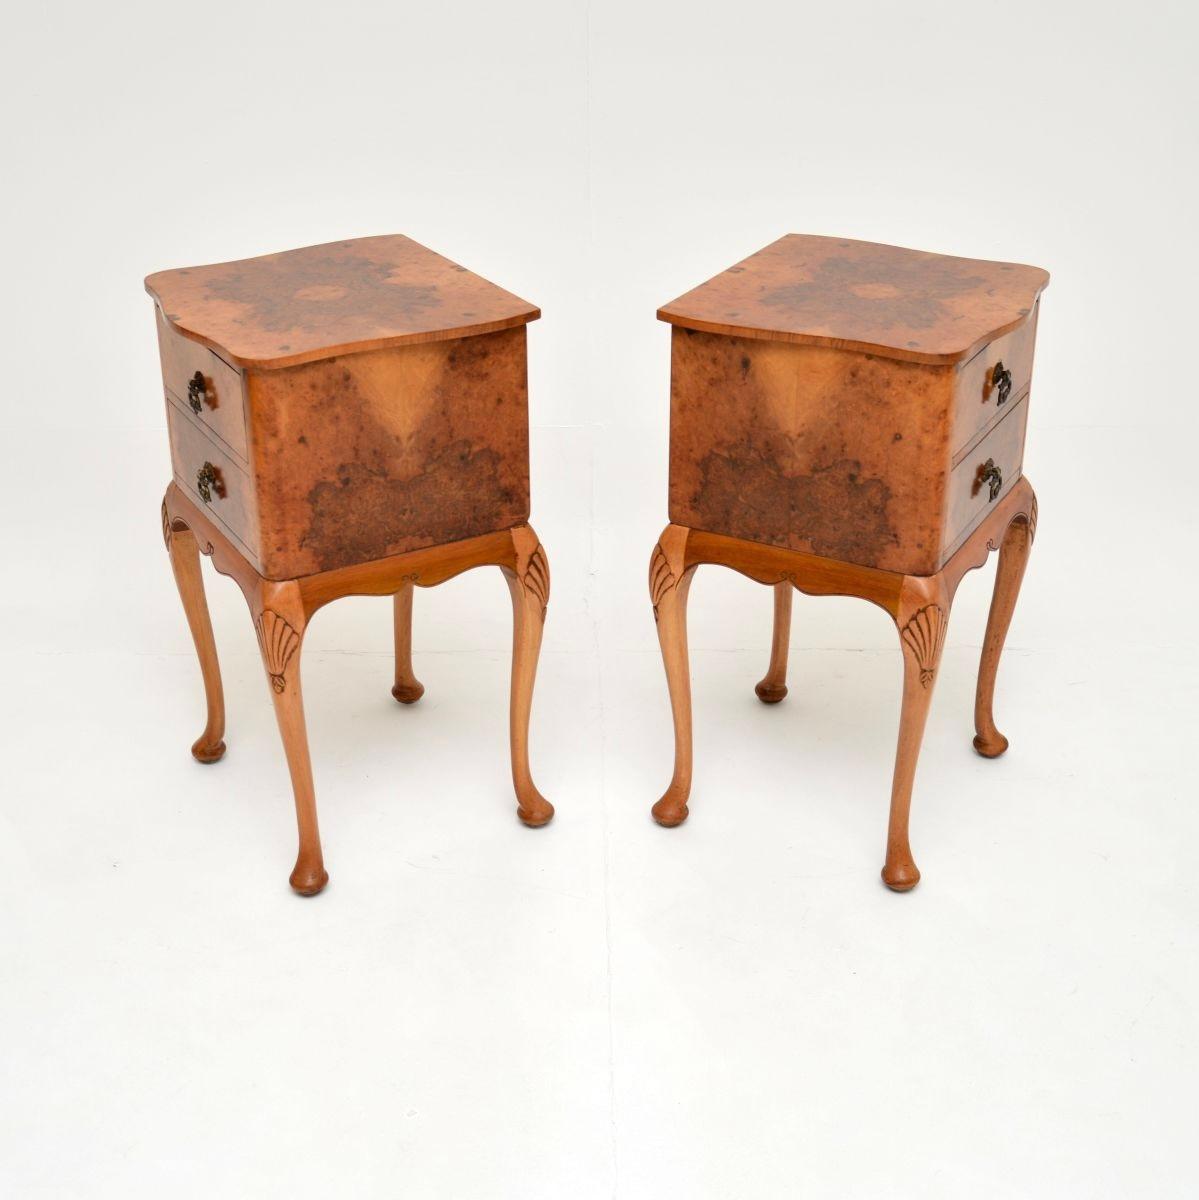 Pair of Antique Burr Walnut Bedside Cabinets In Good Condition For Sale In London, GB